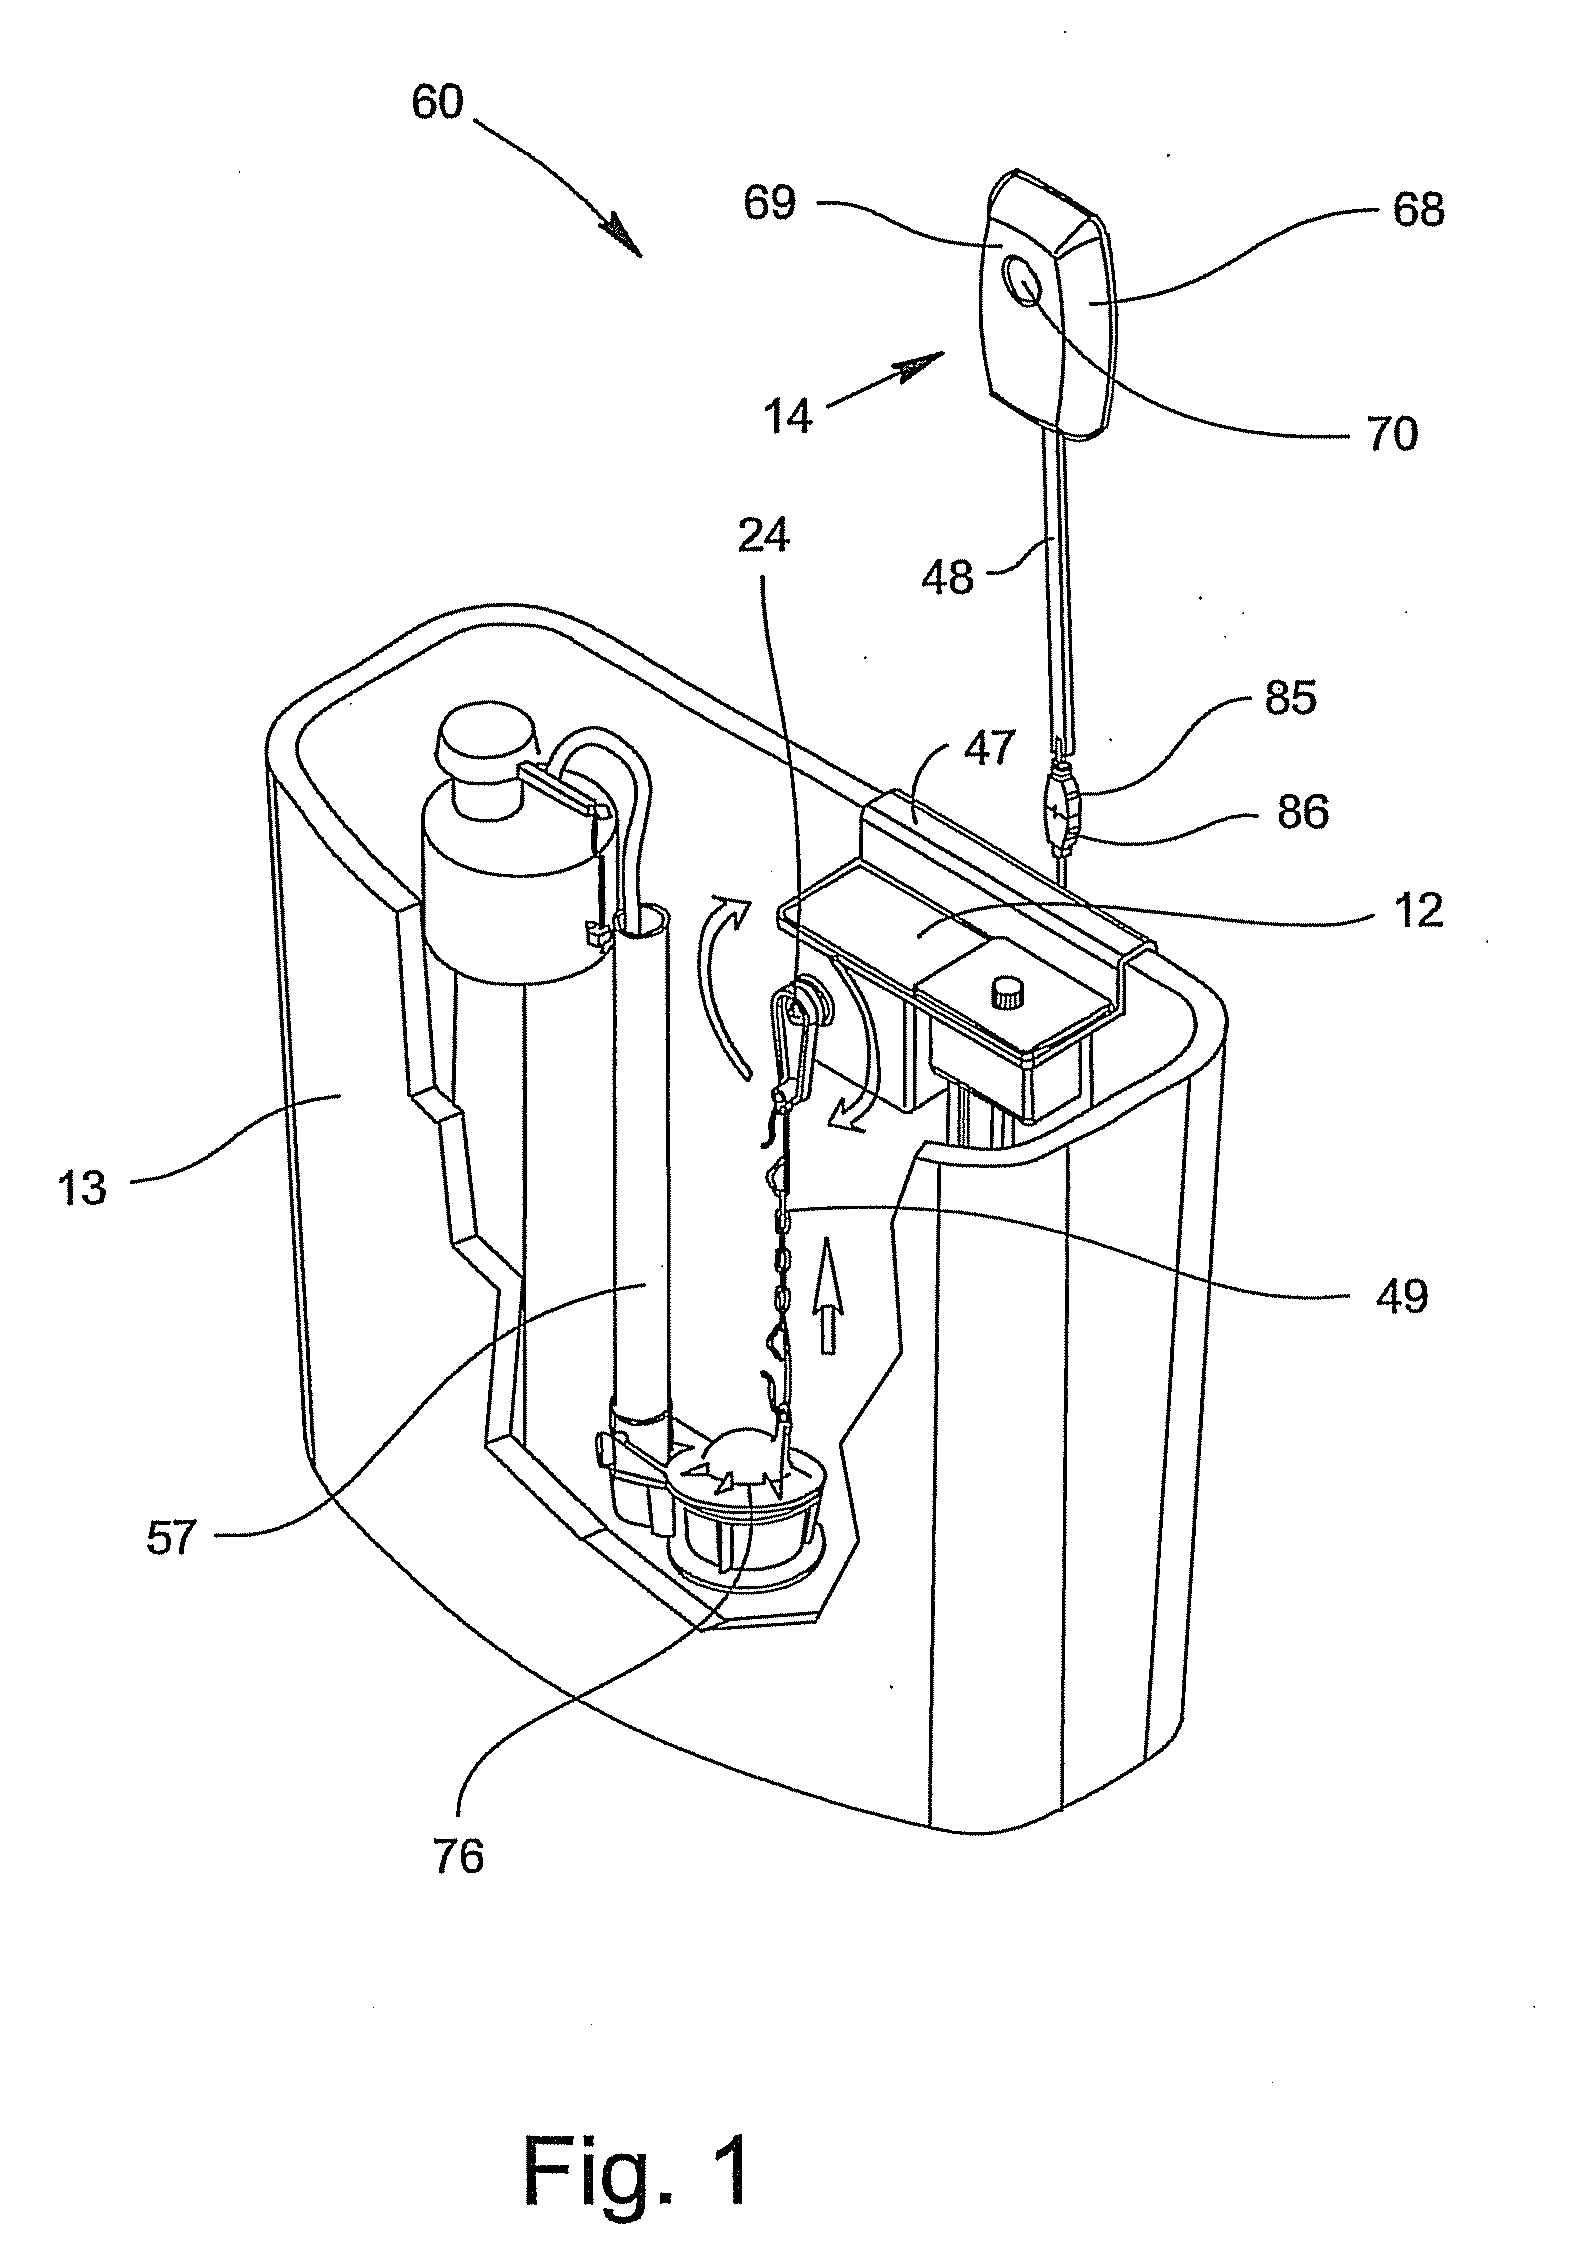 Actuator having a clutch assembly